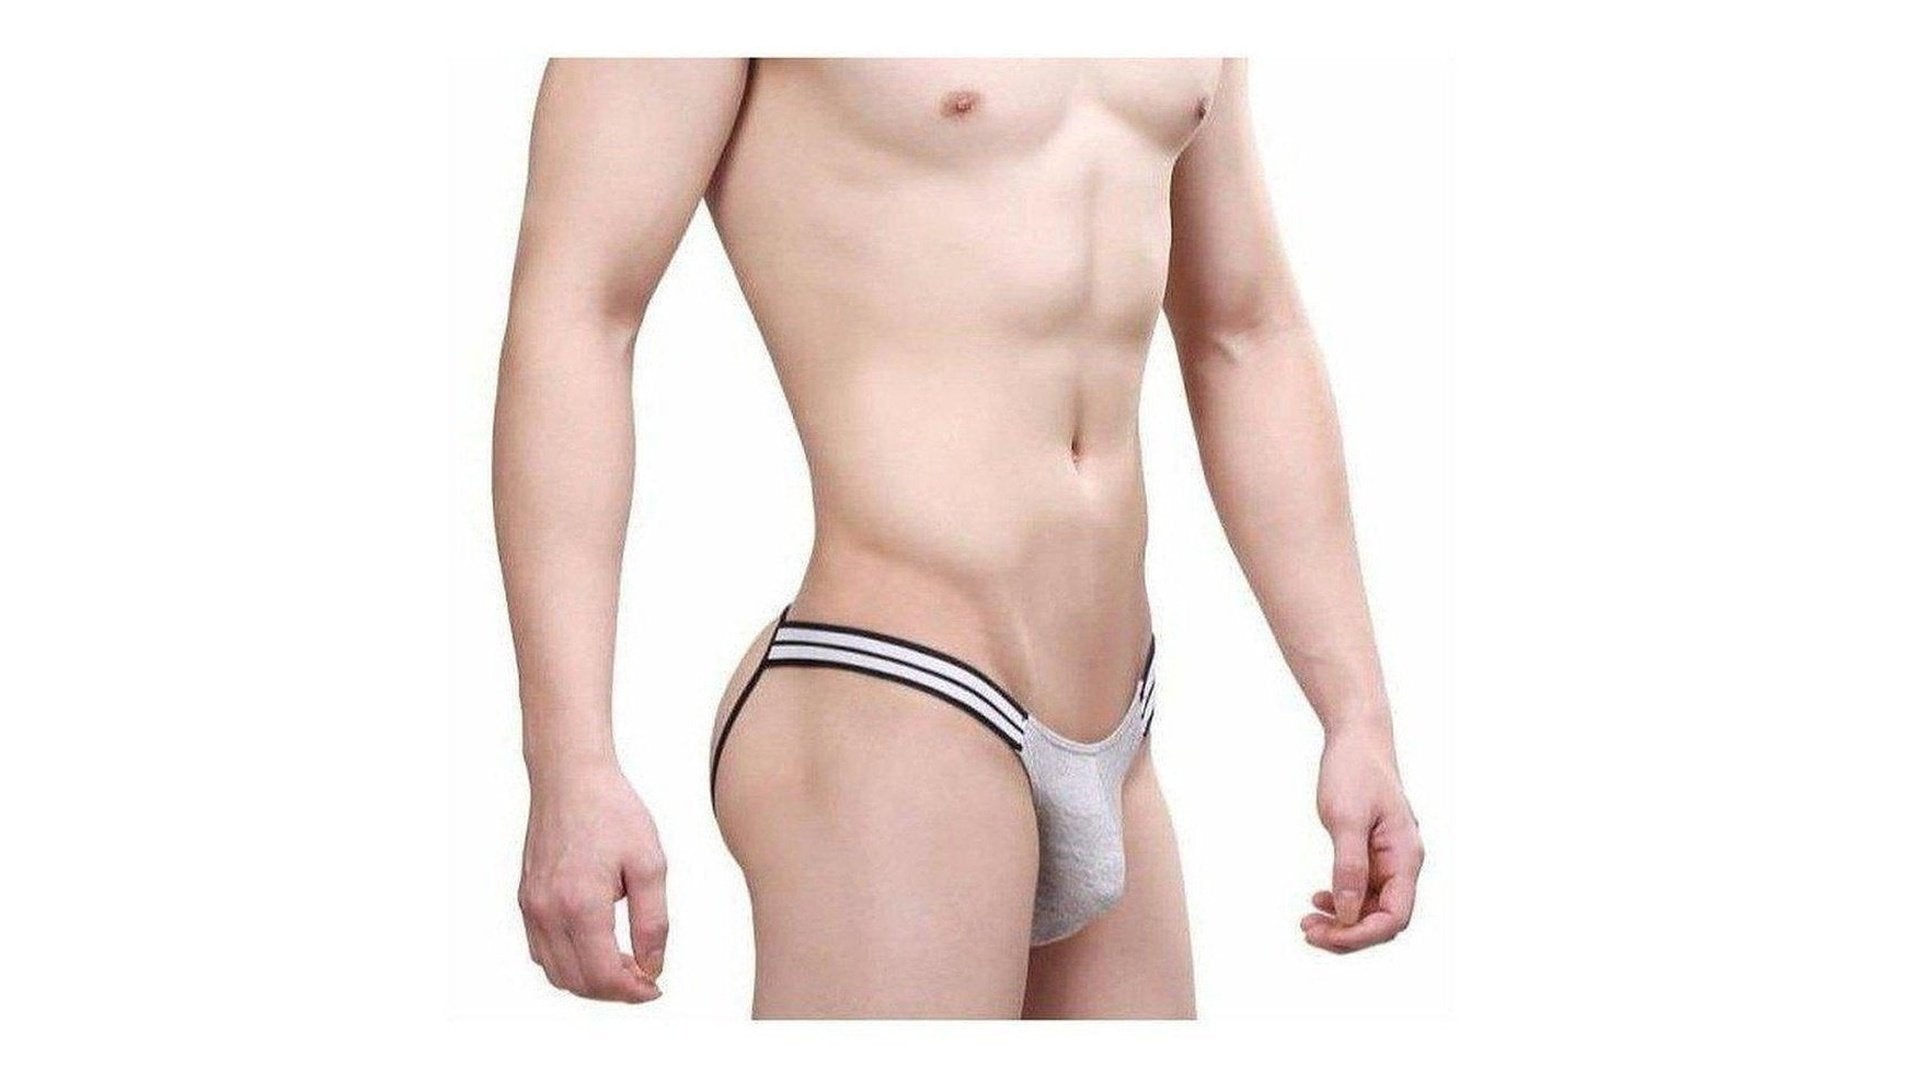 Rock Your Jockstrap Out Publicly!